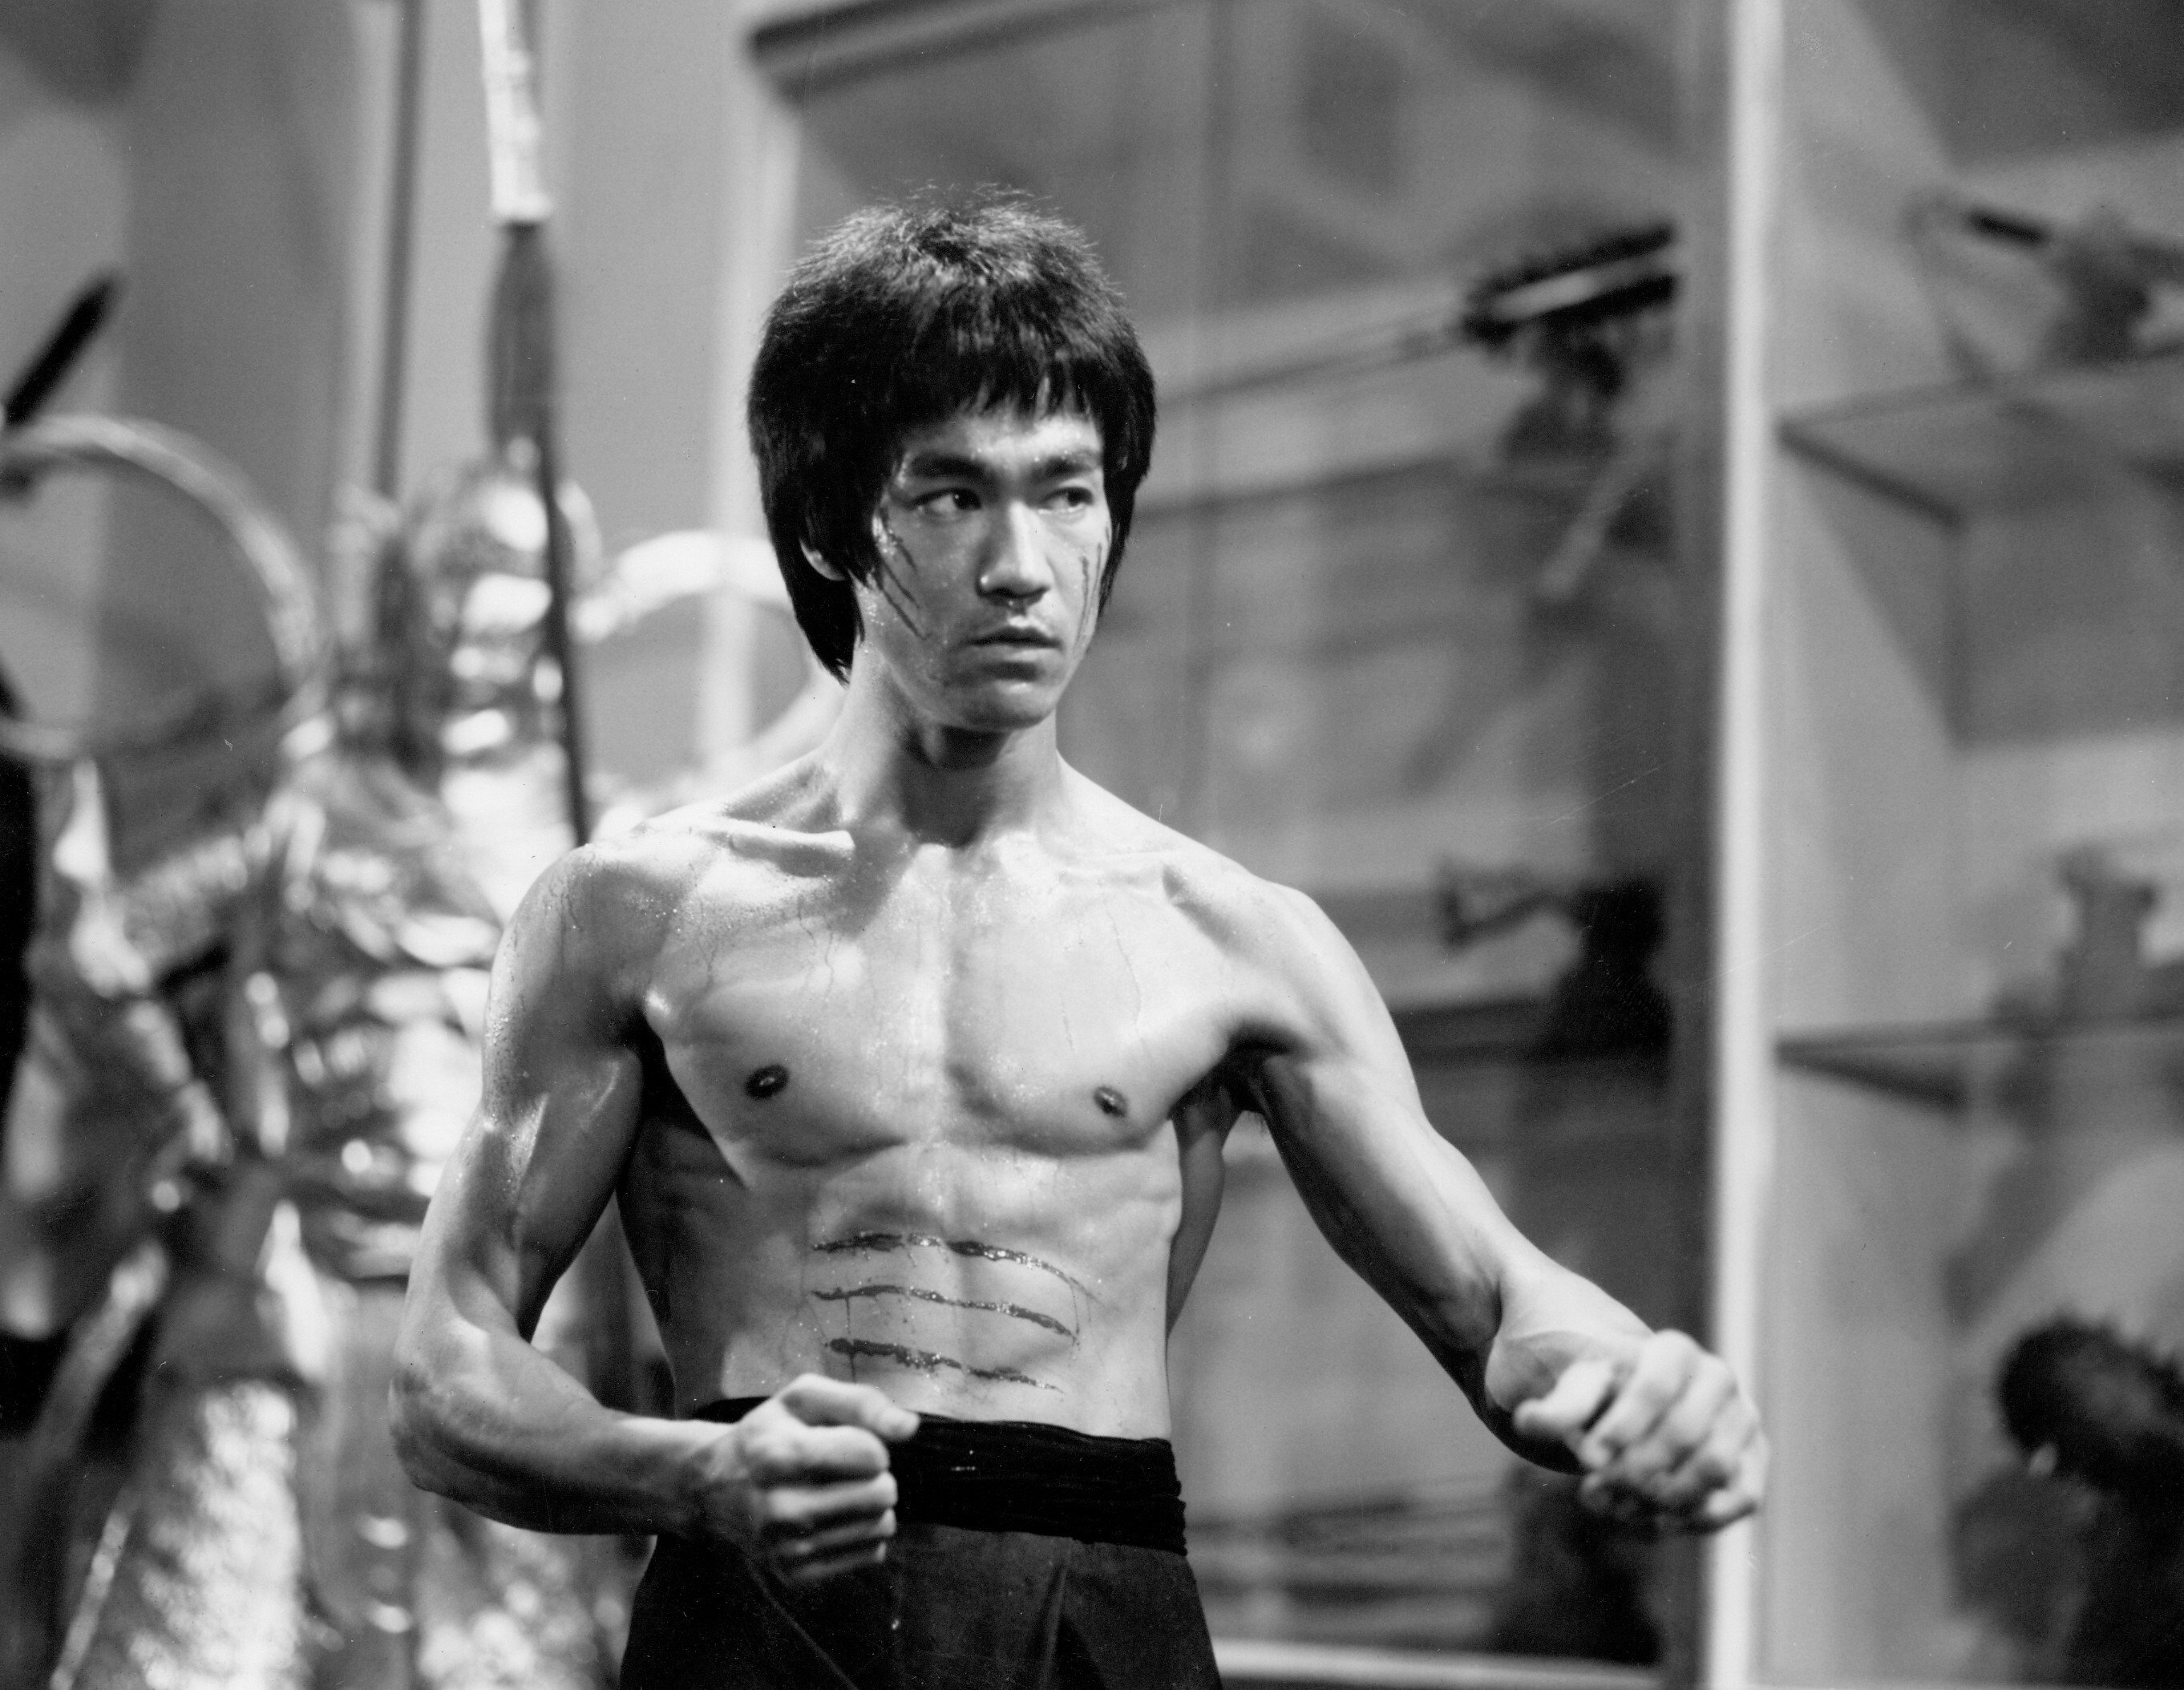 Actor and martial artist Bruce Lee poses for a Warner Bros publicity still for the film ‘Enter the Dragon’ in 1973 in Hong Kong. Photo: Michael Ochs Archives/Getty Images